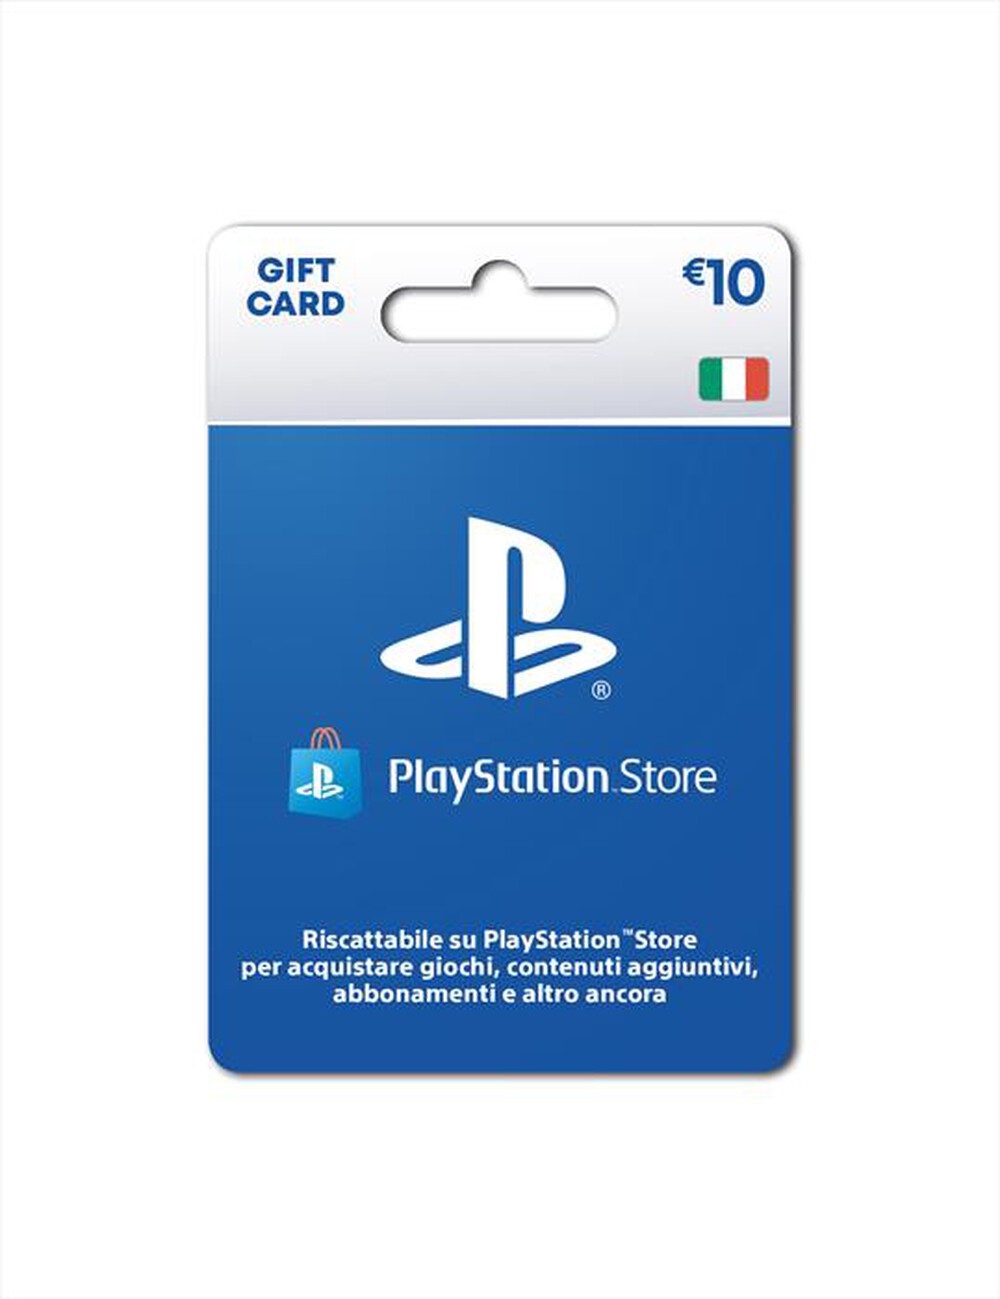 "SONY COMPUTER - PlayStation Network Card 10 €"